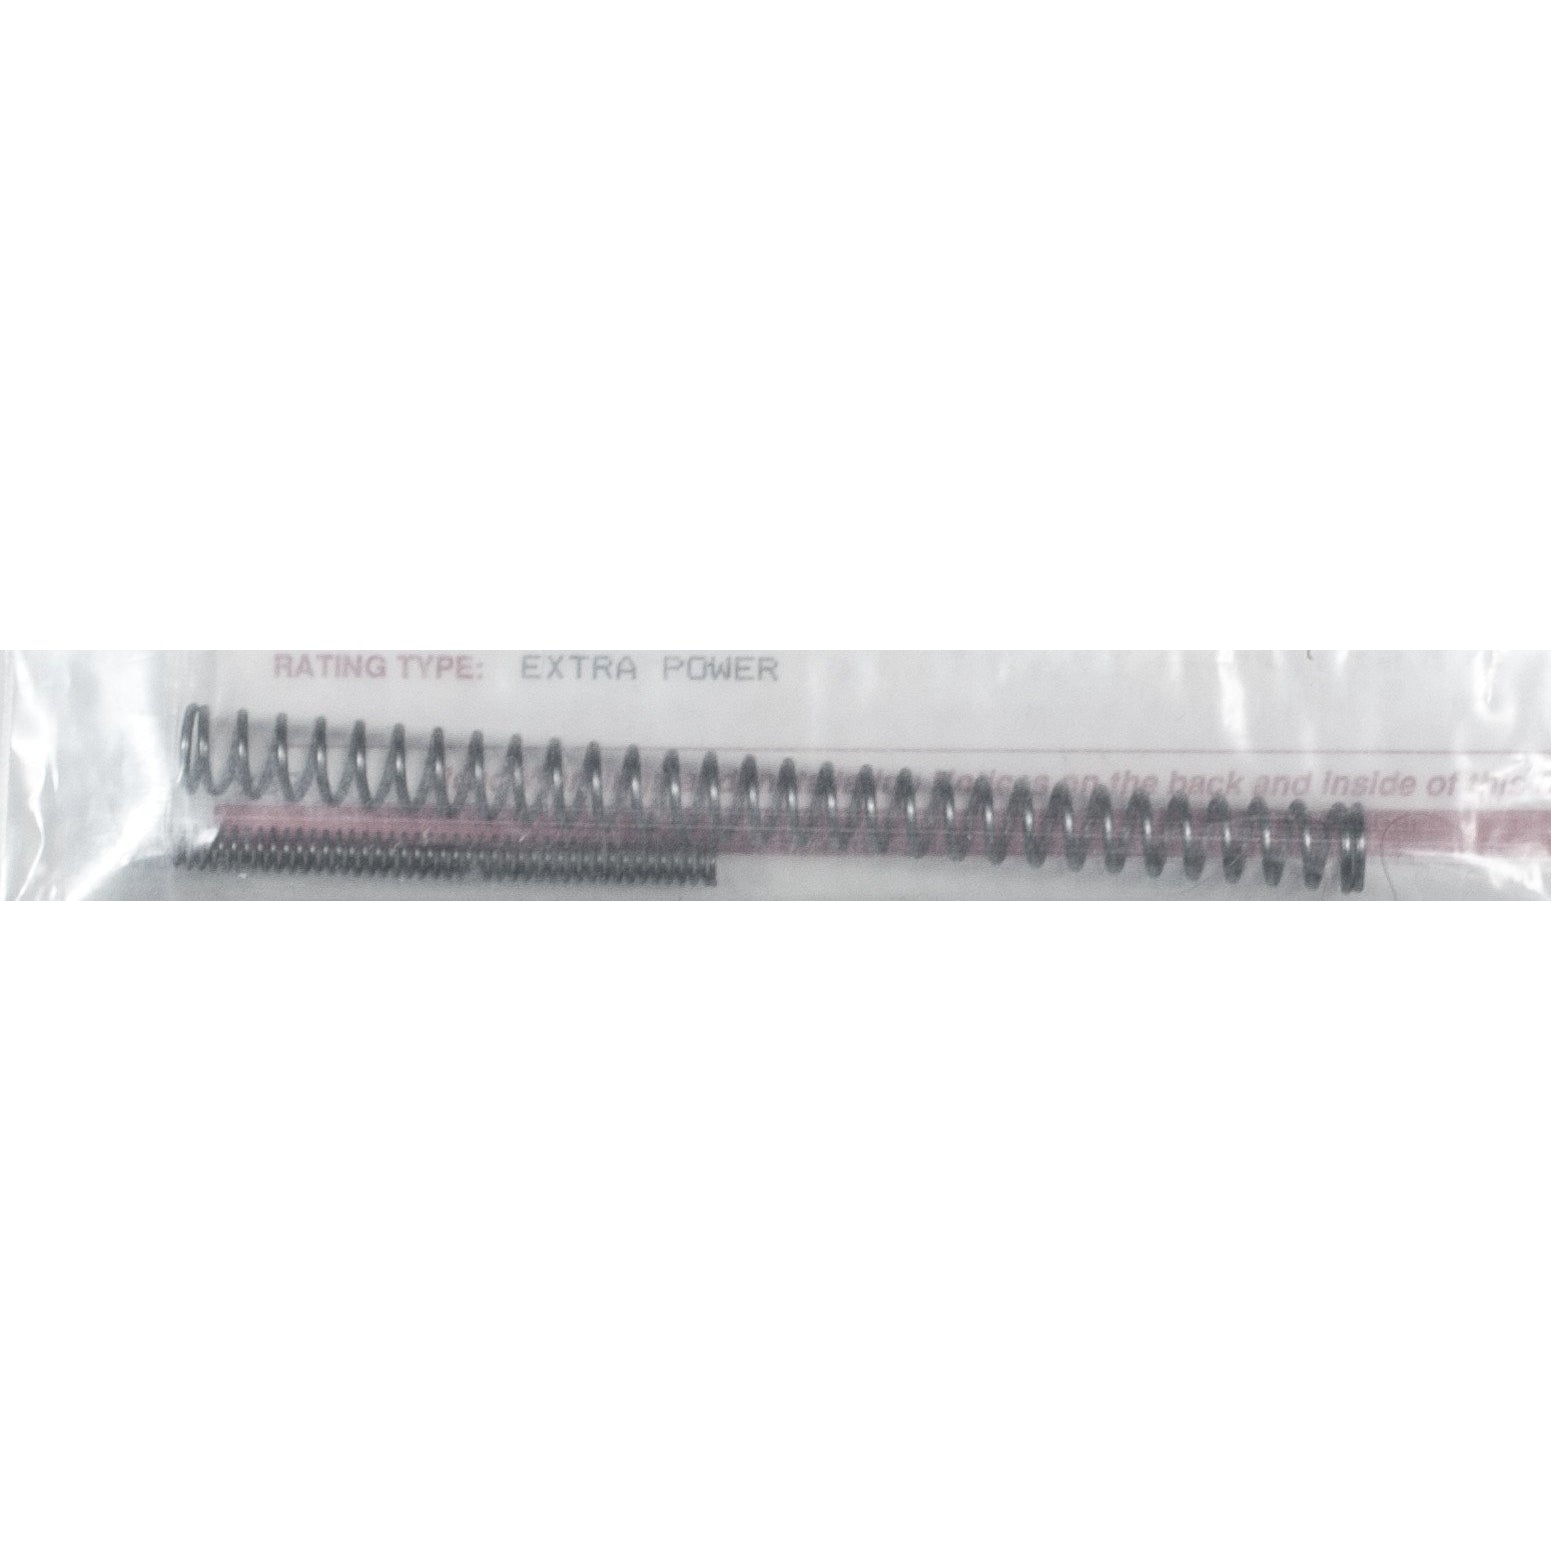 Wolff Precision Load rated Conventional Recoil Spring for TZ-75, P-9 LSO Long Slide Model 9mm & 40